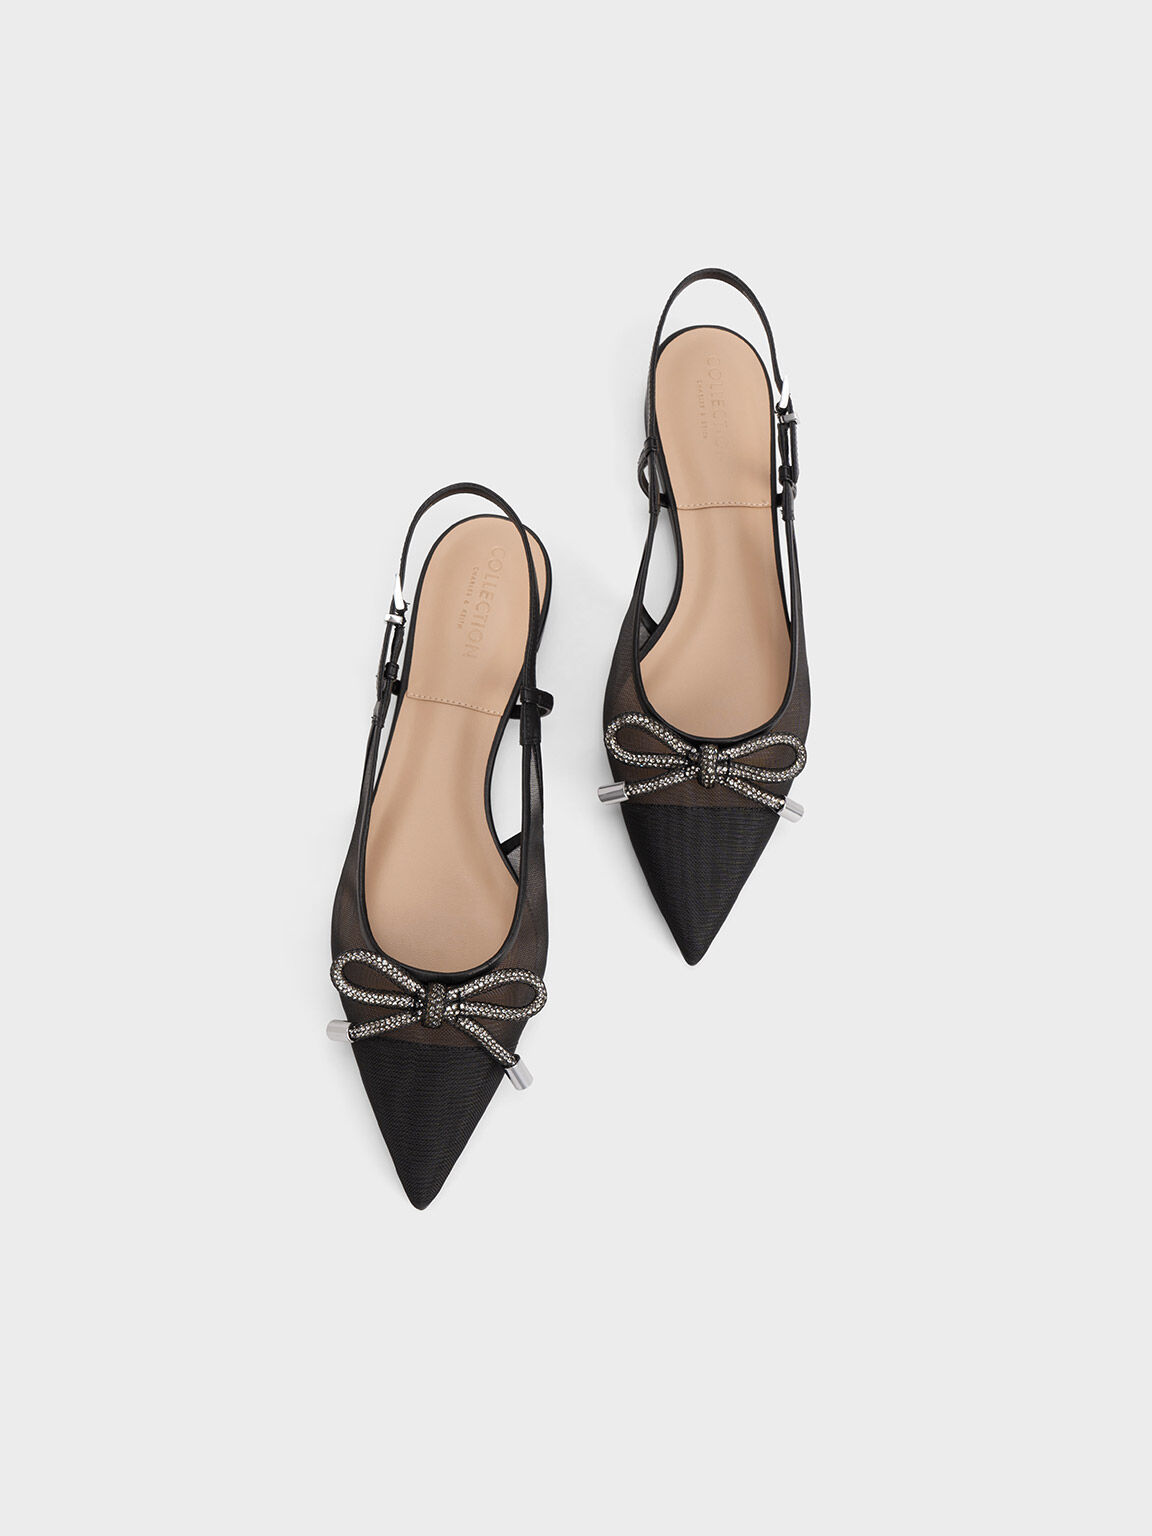 Signature Collection | Shop Women’s Shoes | CHARLES & KEITH SG